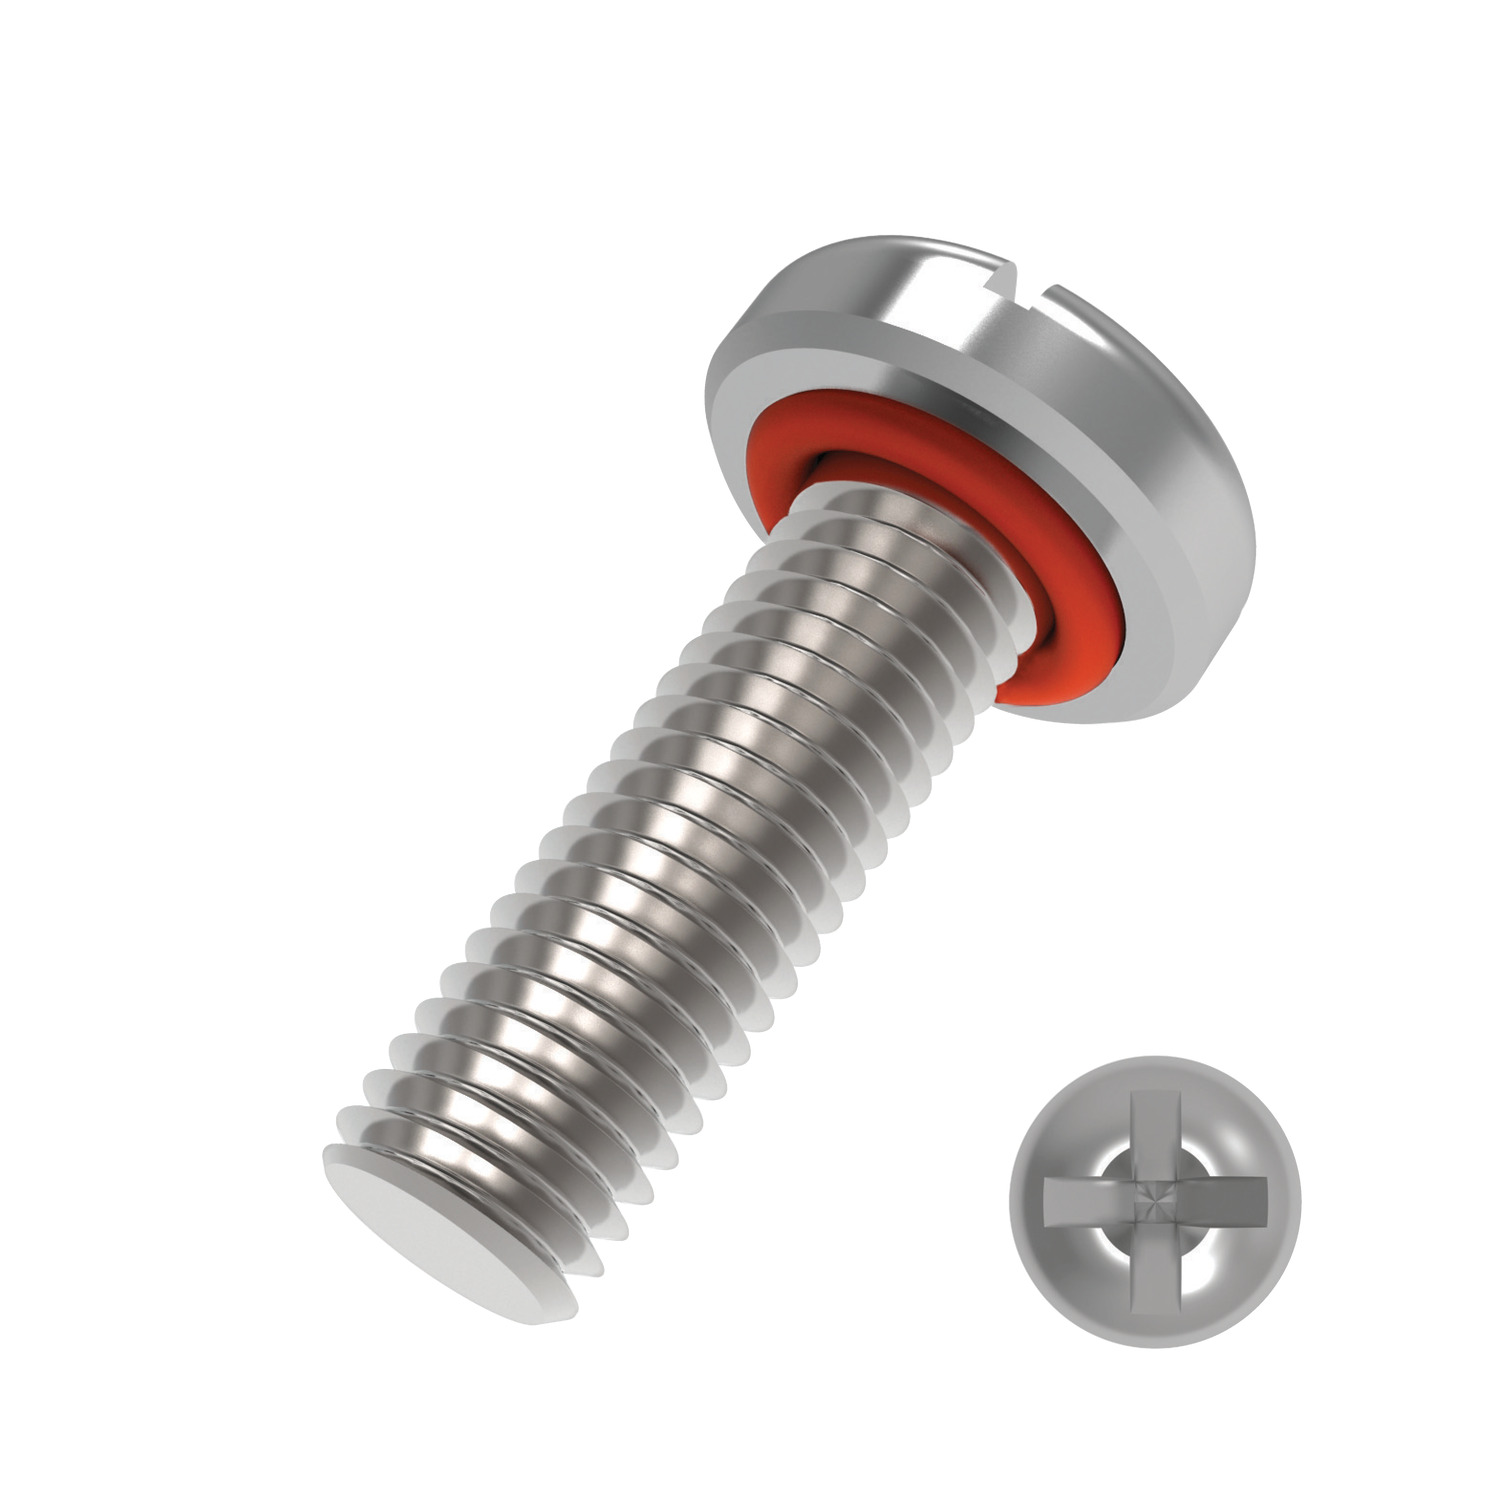 Pan Head Seal Screws Self-sealing screws, pan head Phillips drive with integral O ring groove to seal liquids and gases out and in. M2 to M10 A2 or A4 stainless steel.